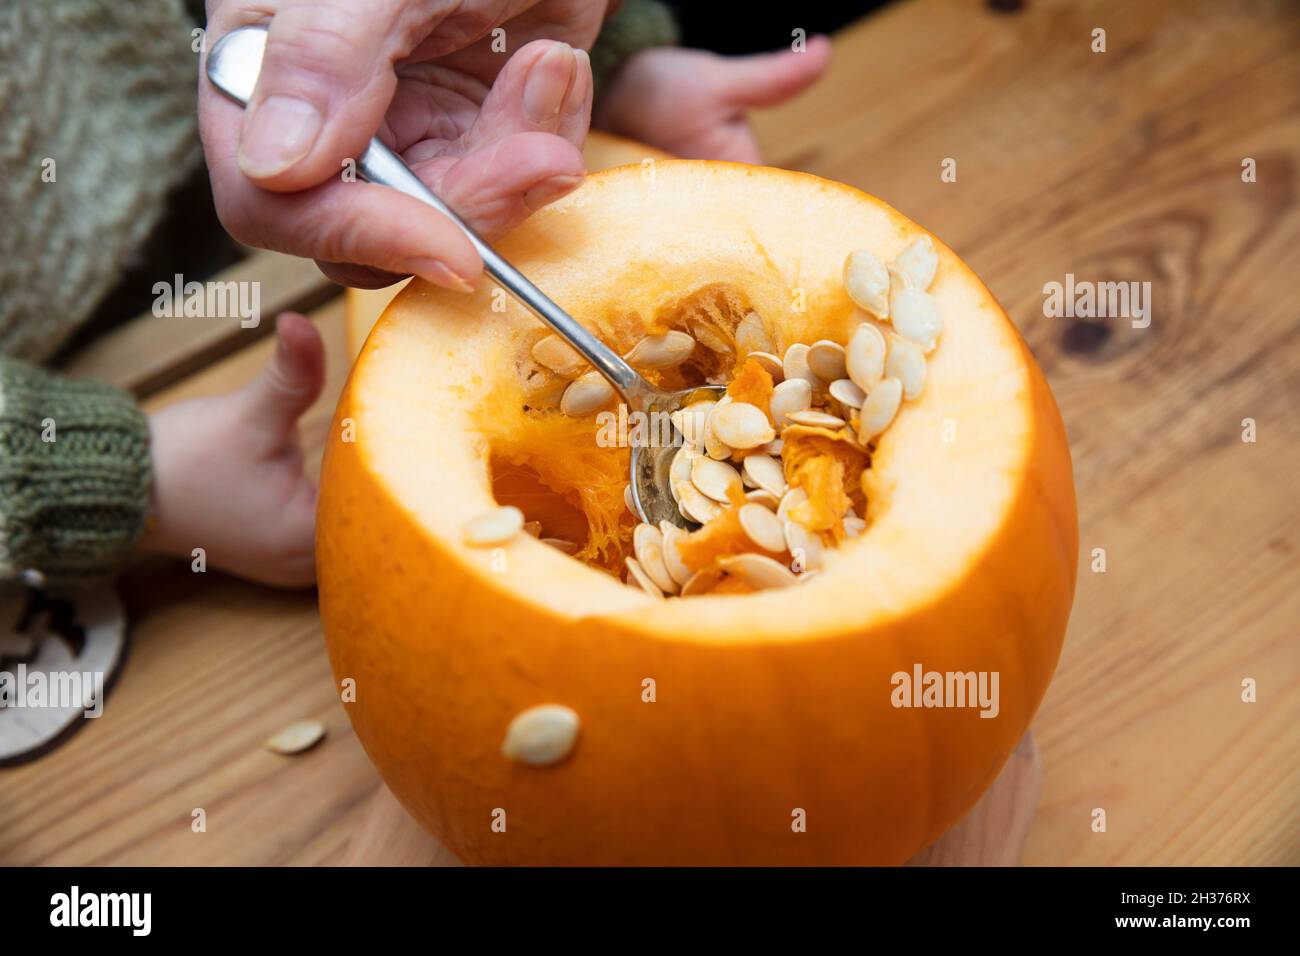 orange Halloween pumpkin being carved into a lantern decoration by a grandmother and child Stock Photo